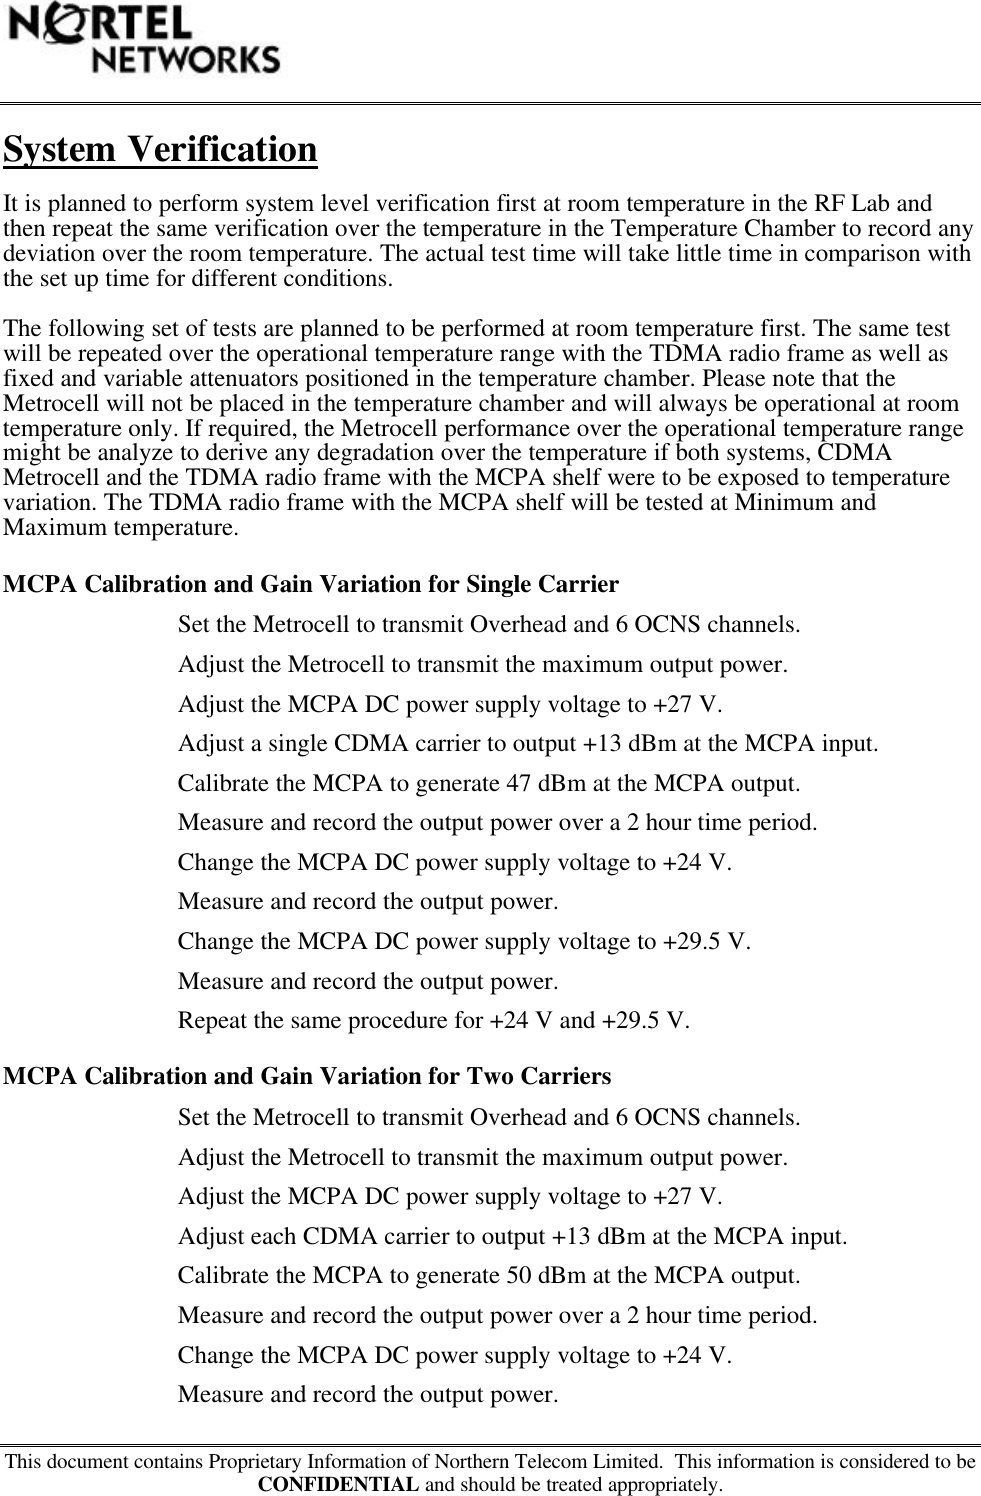 This document contains Proprietary Information of Northern Telecom Limited.  This information is considered to beCONFIDENTIAL and should be treated appropriately.System VerificationIt is planned to perform system level verification first at room temperature in the RF Lab andthen repeat the same verification over the temperature in the Temperature Chamber to record anydeviation over the room temperature. The actual test time will take little time in comparison withthe set up time for different conditions.The following set of tests are planned to be performed at room temperature first. The same testwill be repeated over the operational temperature range with the TDMA radio frame as well asfixed and variable attenuators positioned in the temperature chamber. Please note that theMetrocell will not be placed in the temperature chamber and will always be operational at roomtemperature only. If required, the Metrocell performance over the operational temperature rangemight be analyze to derive any degradation over the temperature if both systems, CDMAMetrocell and the TDMA radio frame with the MCPA shelf were to be exposed to temperaturevariation. The TDMA radio frame with the MCPA shelf will be tested at Minimum andMaximum temperature.MCPA Calibration and Gain Variation for Single CarrierSet the Metrocell to transmit Overhead and 6 OCNS channels.Adjust the Metrocell to transmit the maximum output power.Adjust the MCPA DC power supply voltage to +27 V.Adjust a single CDMA carrier to output +13 dBm at the MCPA input.Calibrate the MCPA to generate 47 dBm at the MCPA output.Measure and record the output power over a 2 hour time period.Change the MCPA DC power supply voltage to +24 V.Measure and record the output power.Change the MCPA DC power supply voltage to +29.5 V.Measure and record the output power.Repeat the same procedure for +24 V and +29.5 V.MCPA Calibration and Gain Variation for Two CarriersSet the Metrocell to transmit Overhead and 6 OCNS channels.Adjust the Metrocell to transmit the maximum output power.Adjust the MCPA DC power supply voltage to +27 V.Adjust each CDMA carrier to output +13 dBm at the MCPA input.Calibrate the MCPA to generate 50 dBm at the MCPA output.Measure and record the output power over a 2 hour time period.Change the MCPA DC power supply voltage to +24 V.Measure and record the output power.